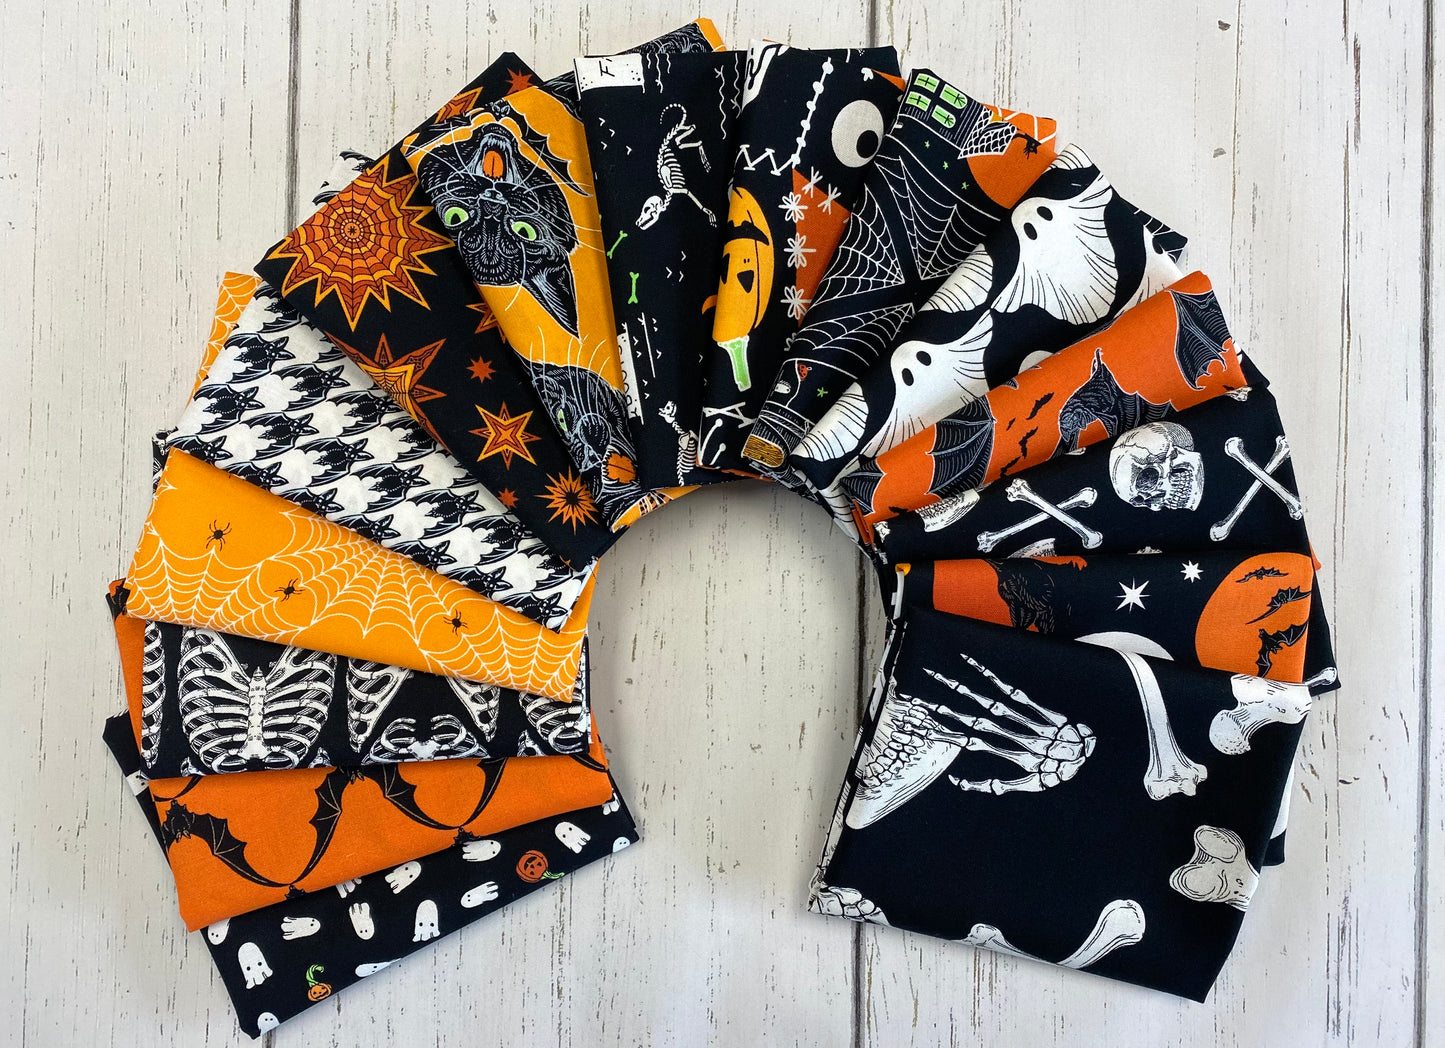 Scaredy Cat by Rachel Hauer Trick or Treat    PWRH036.BLACK Cotton Woven Fabric